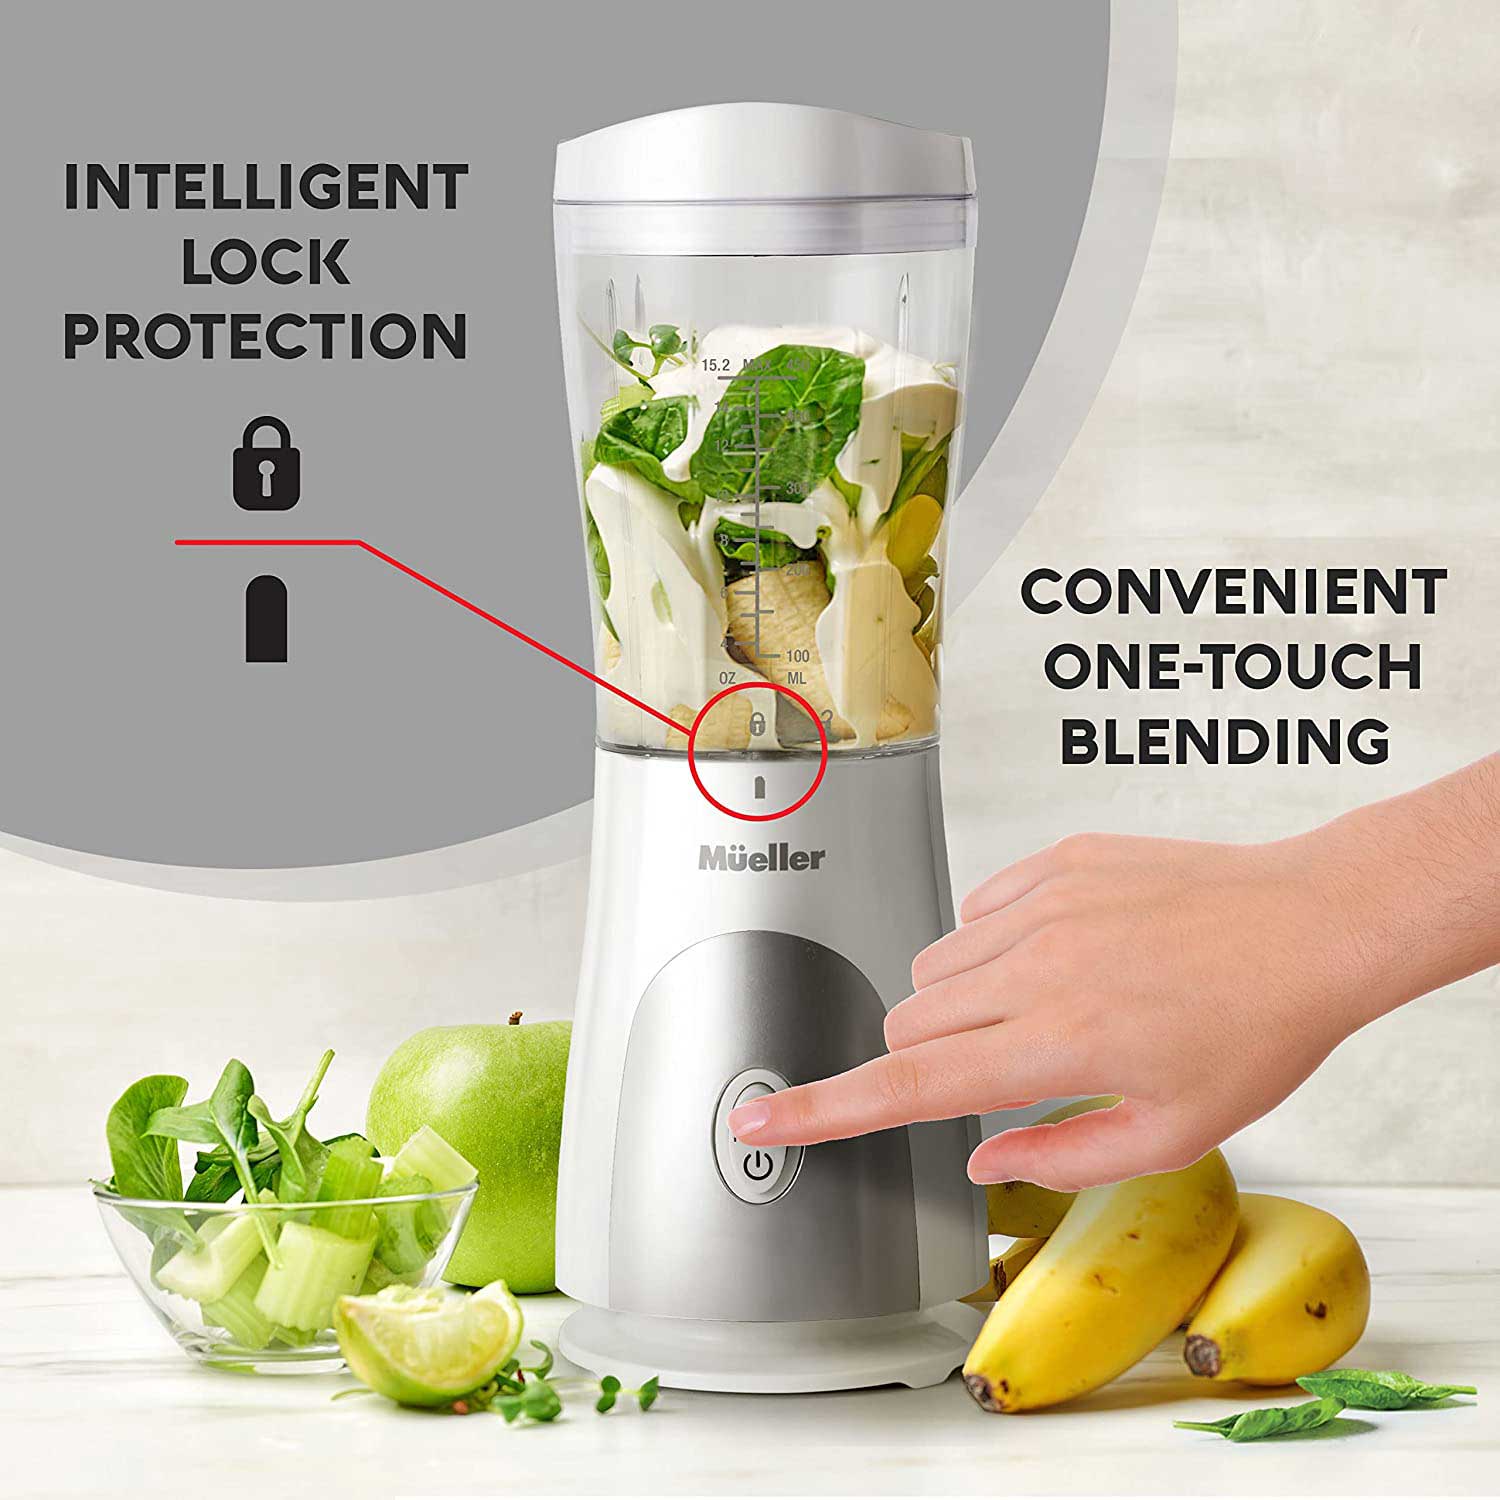 Mueller Ultra Bullet Personal Blender for Shakes and Smoothies